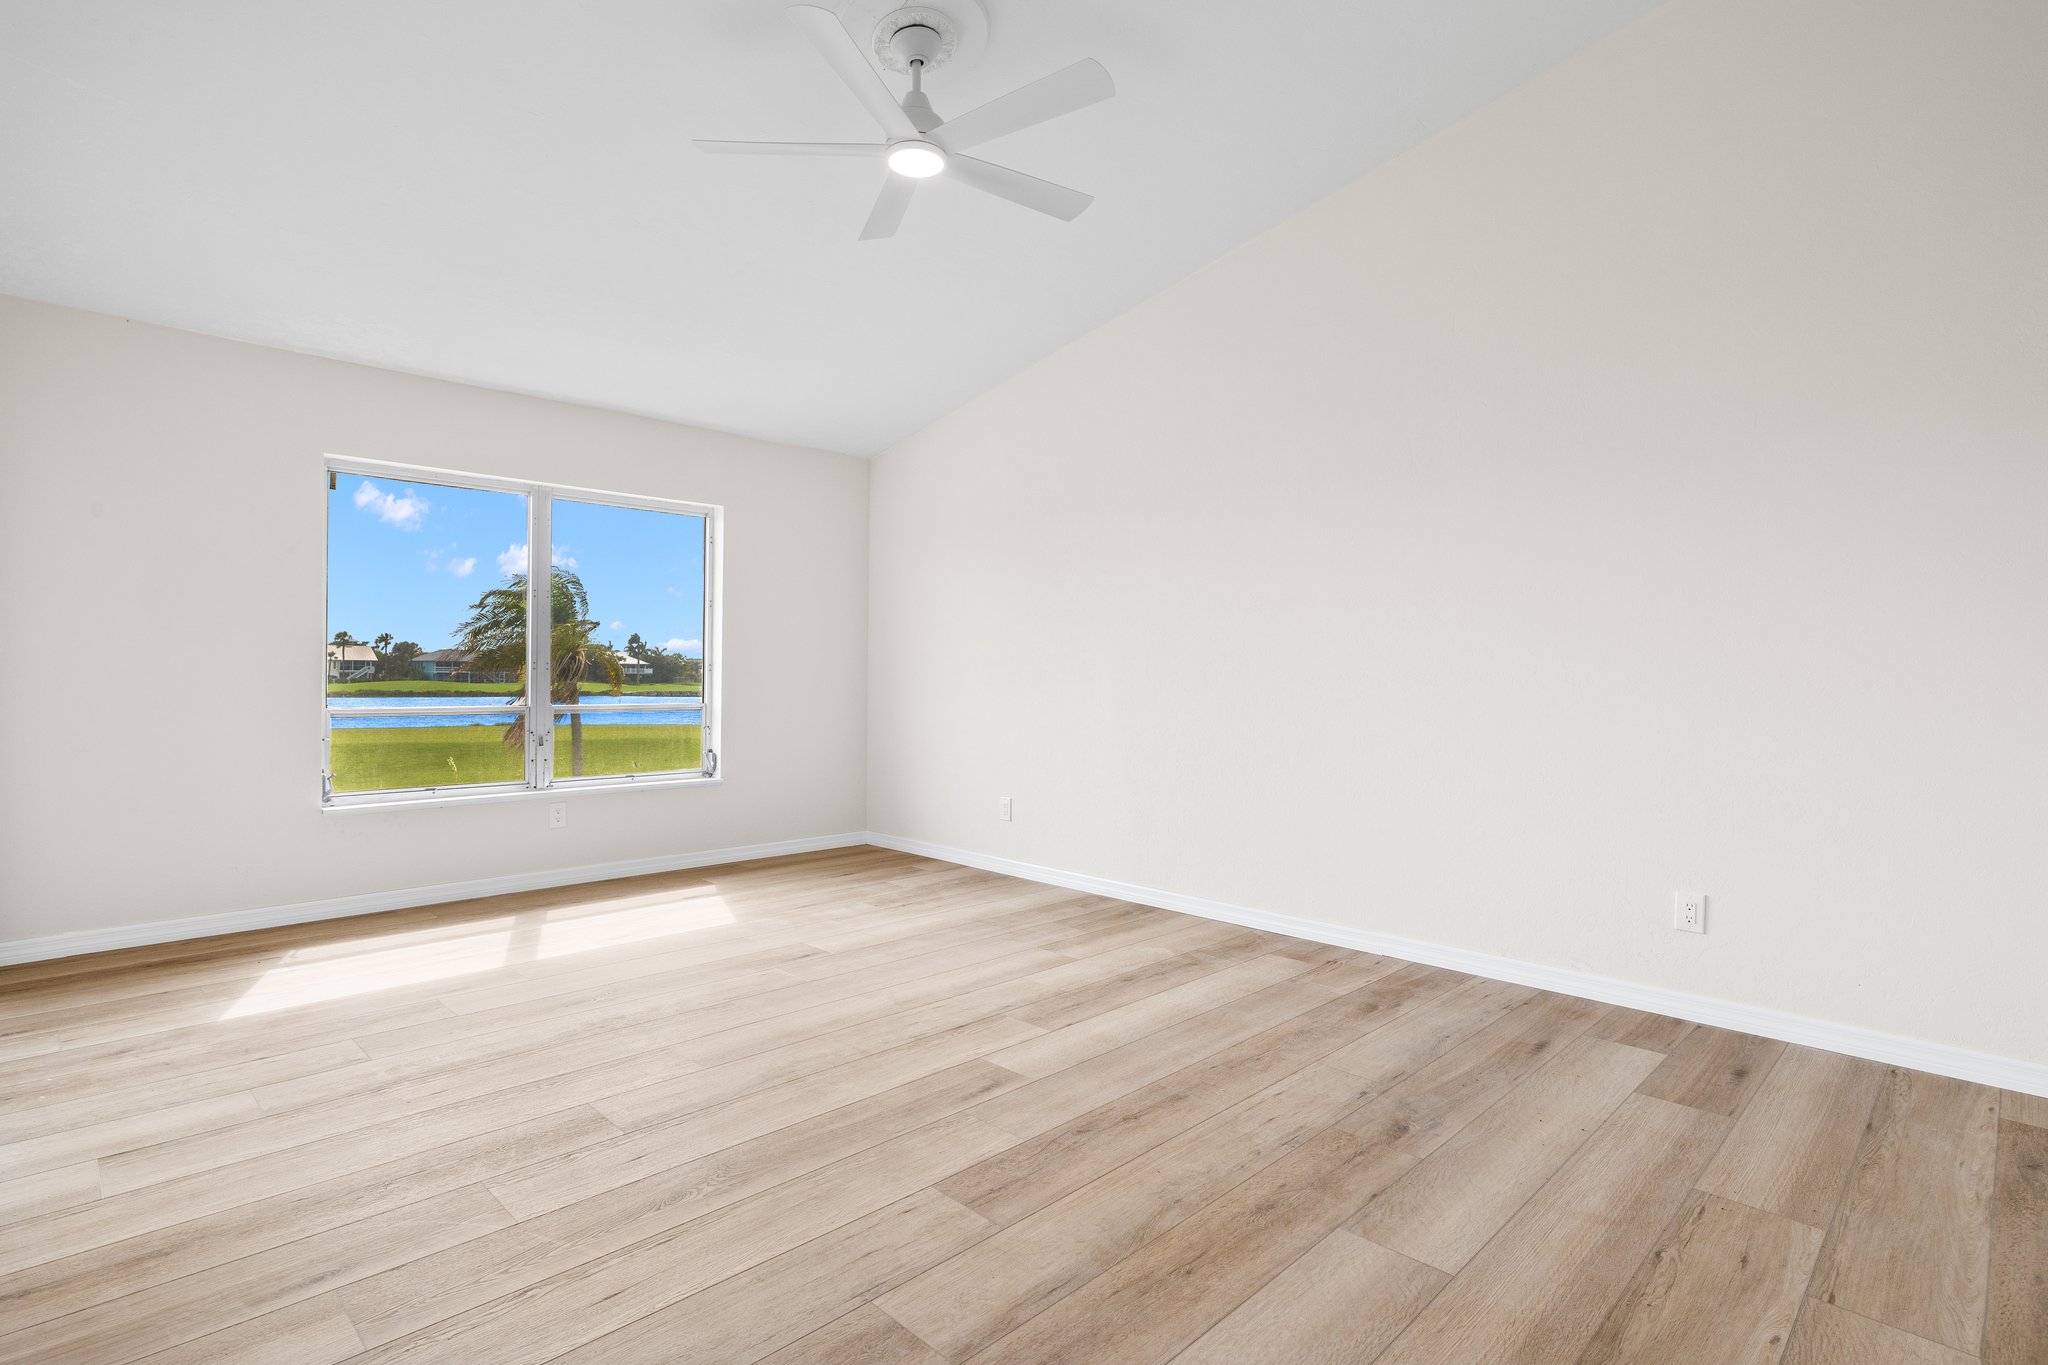 Virtual Staging